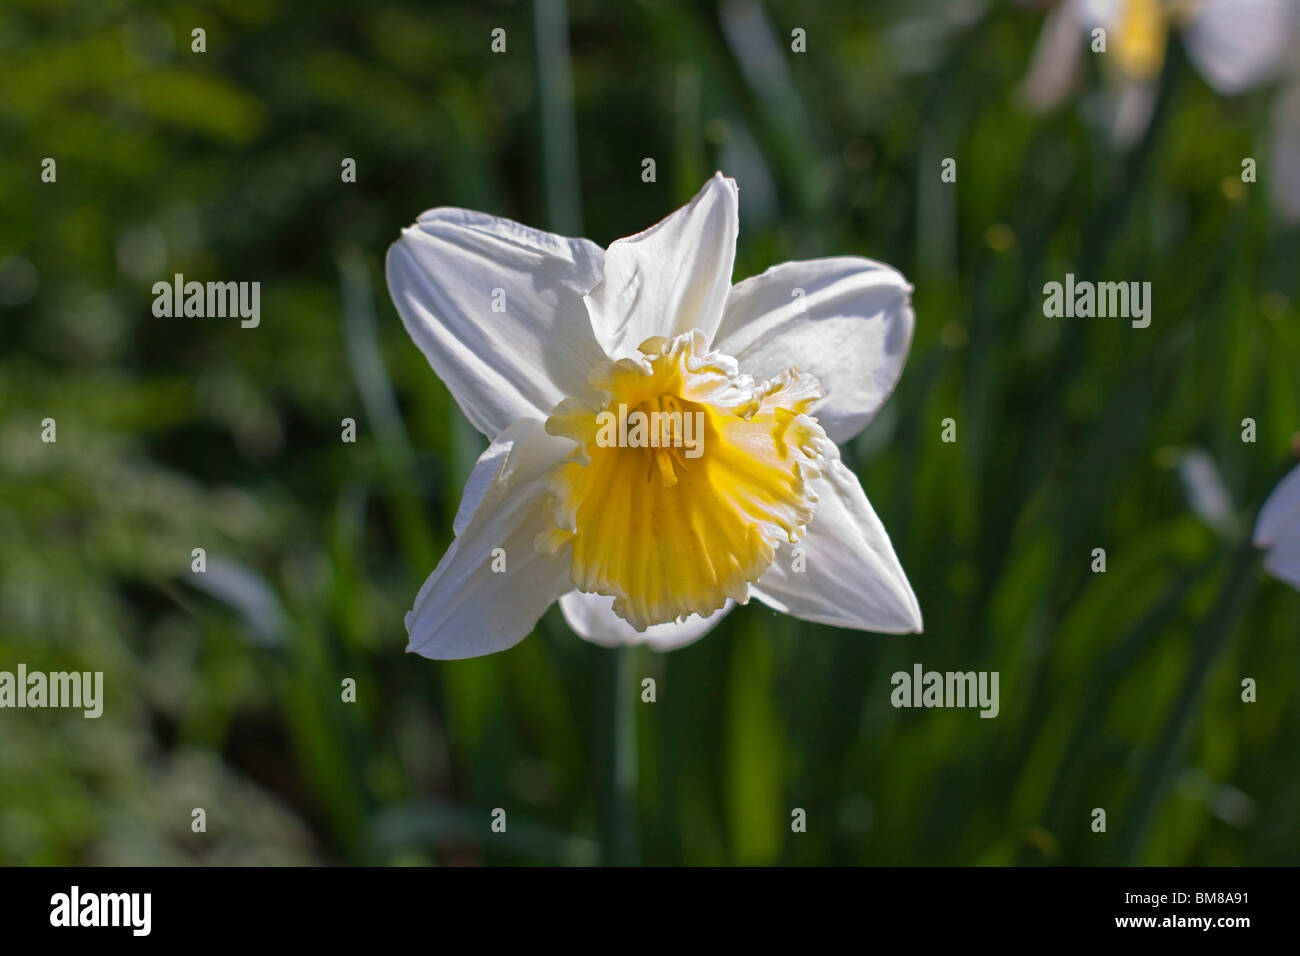 Daffodil flower  daffodils Head on white petals St David's day Wales  Jonquille narcissus welsh Horizontal 104673 Daffodil Stock Photo